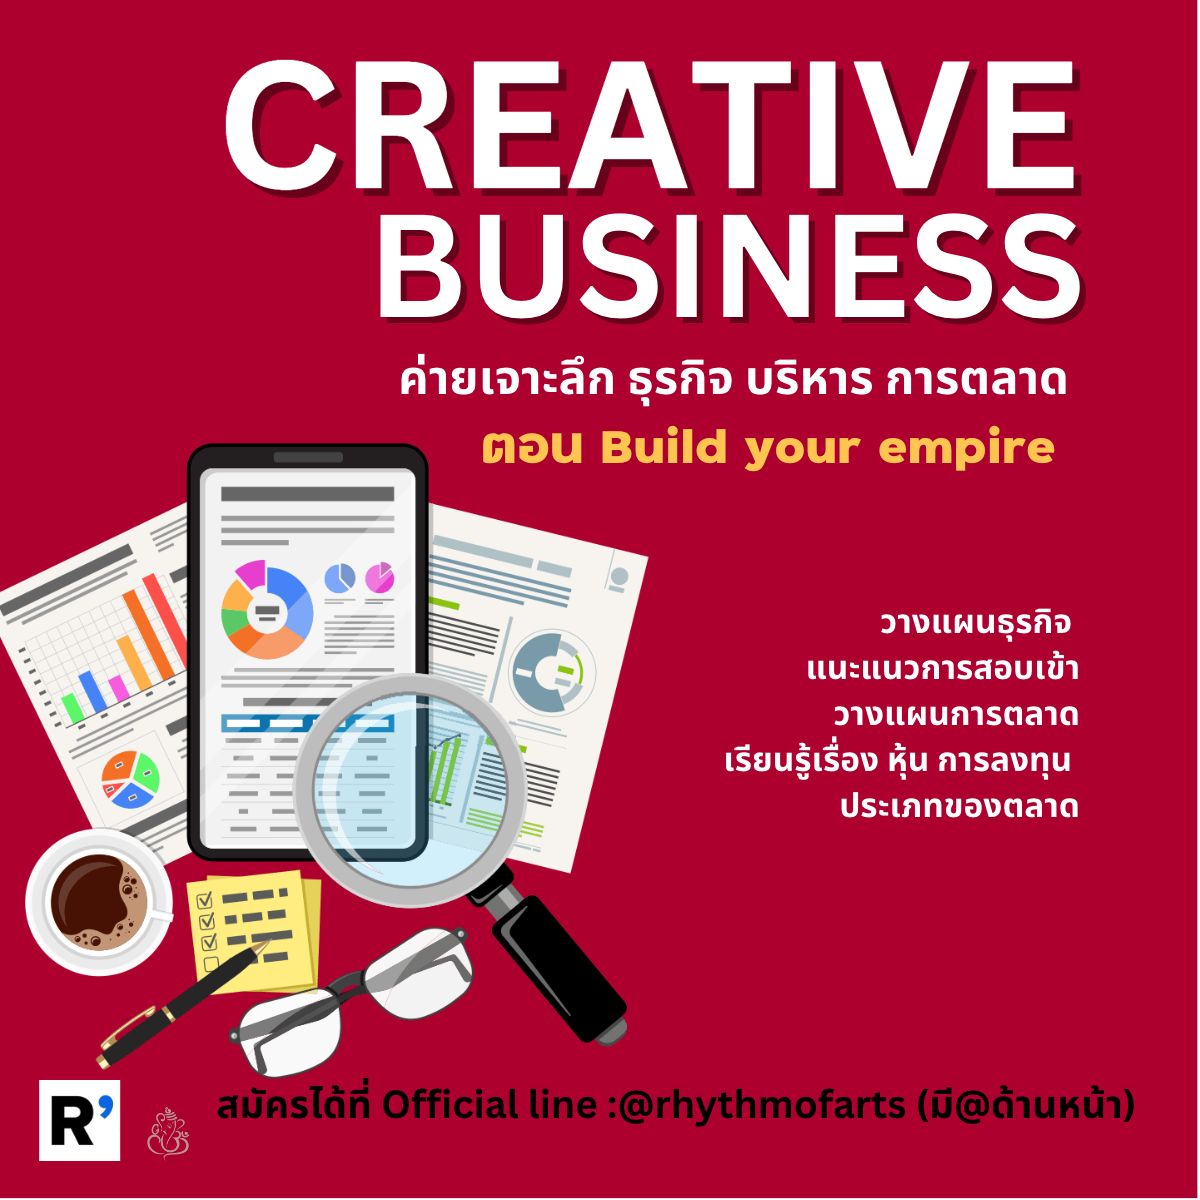 CREATIVE BUSINESS  ตอน Build your own empire